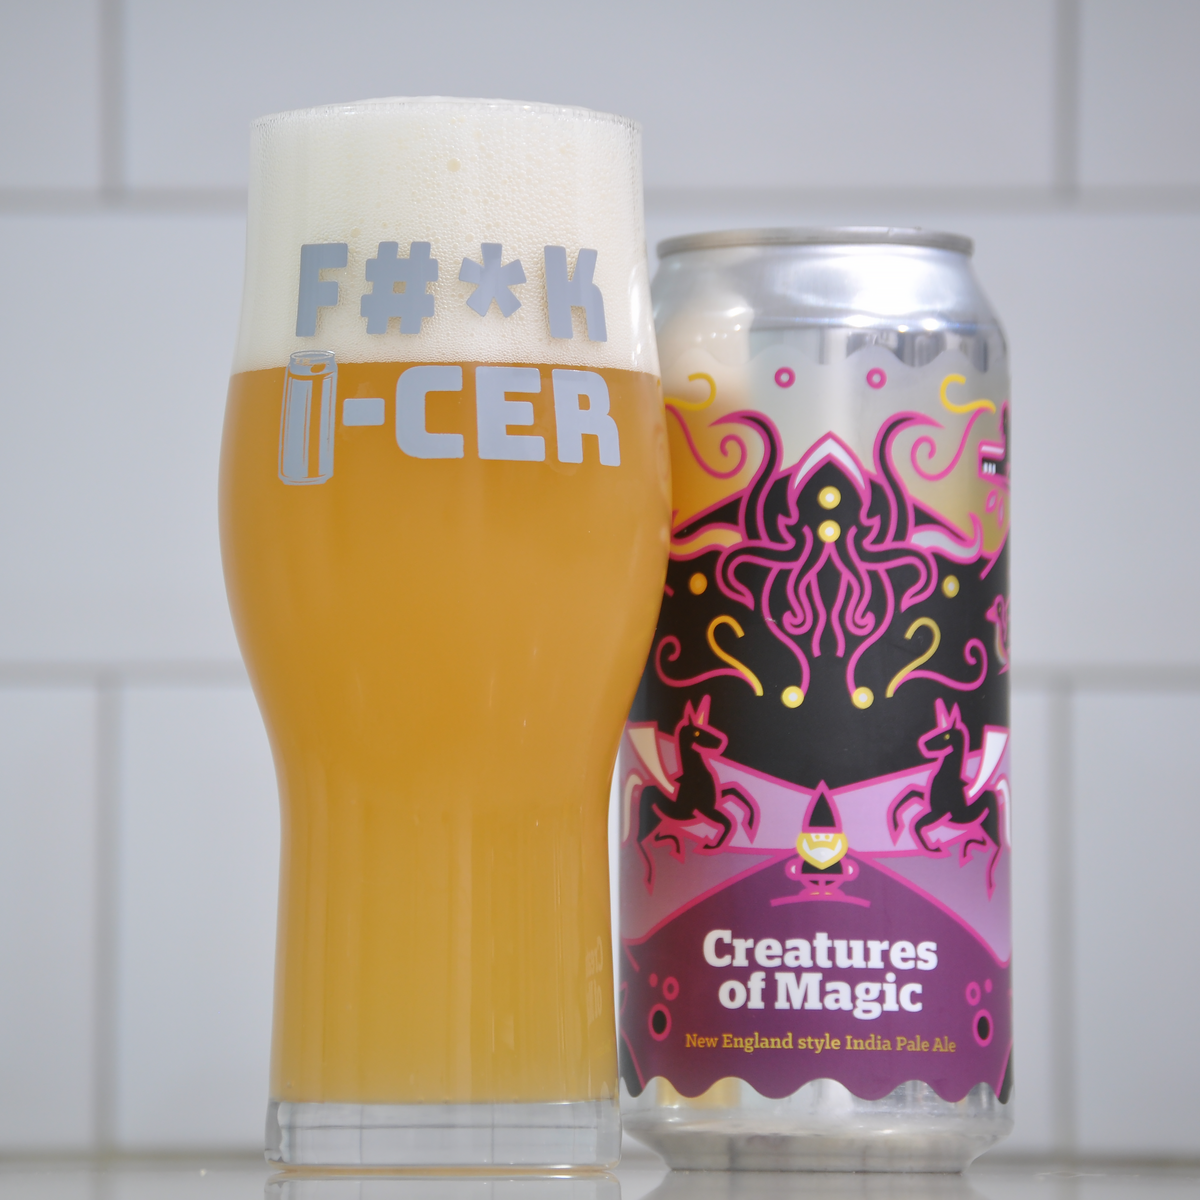 Best Fuck Cancer Gifts, and Best Glasswar for Craft Beer, and Best Charity Beer Glasses